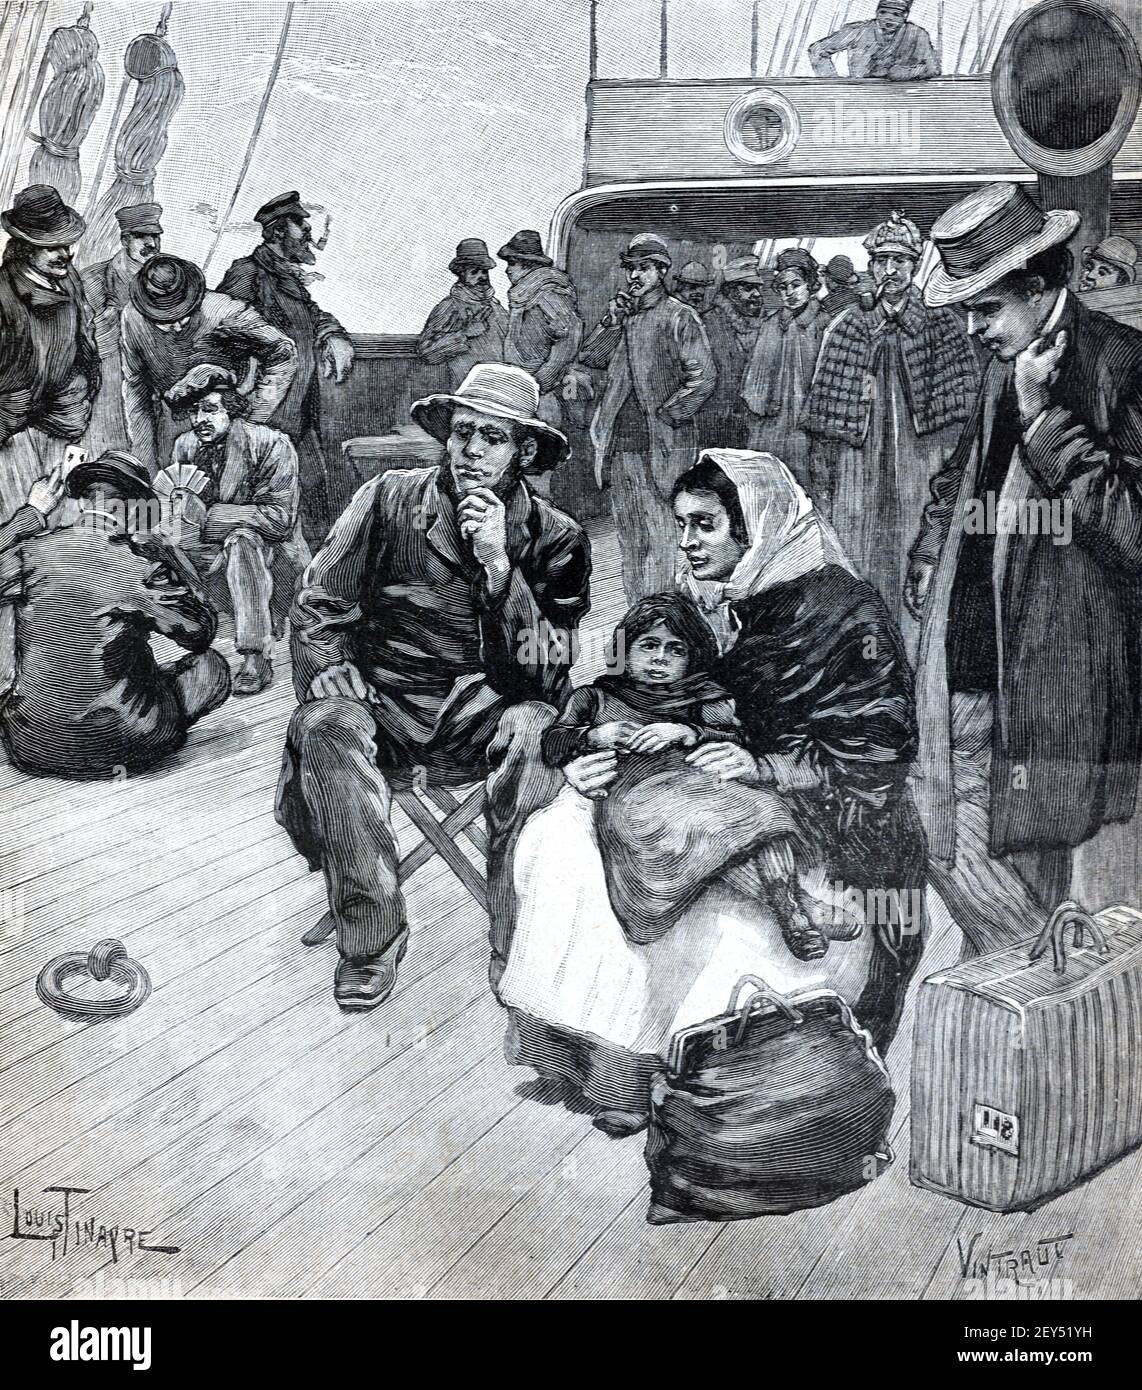 European Immigrants on Board Ship Bound for the New World, North or South Ammerica 1896 Vintage Illustration or Engraving Stock Photo